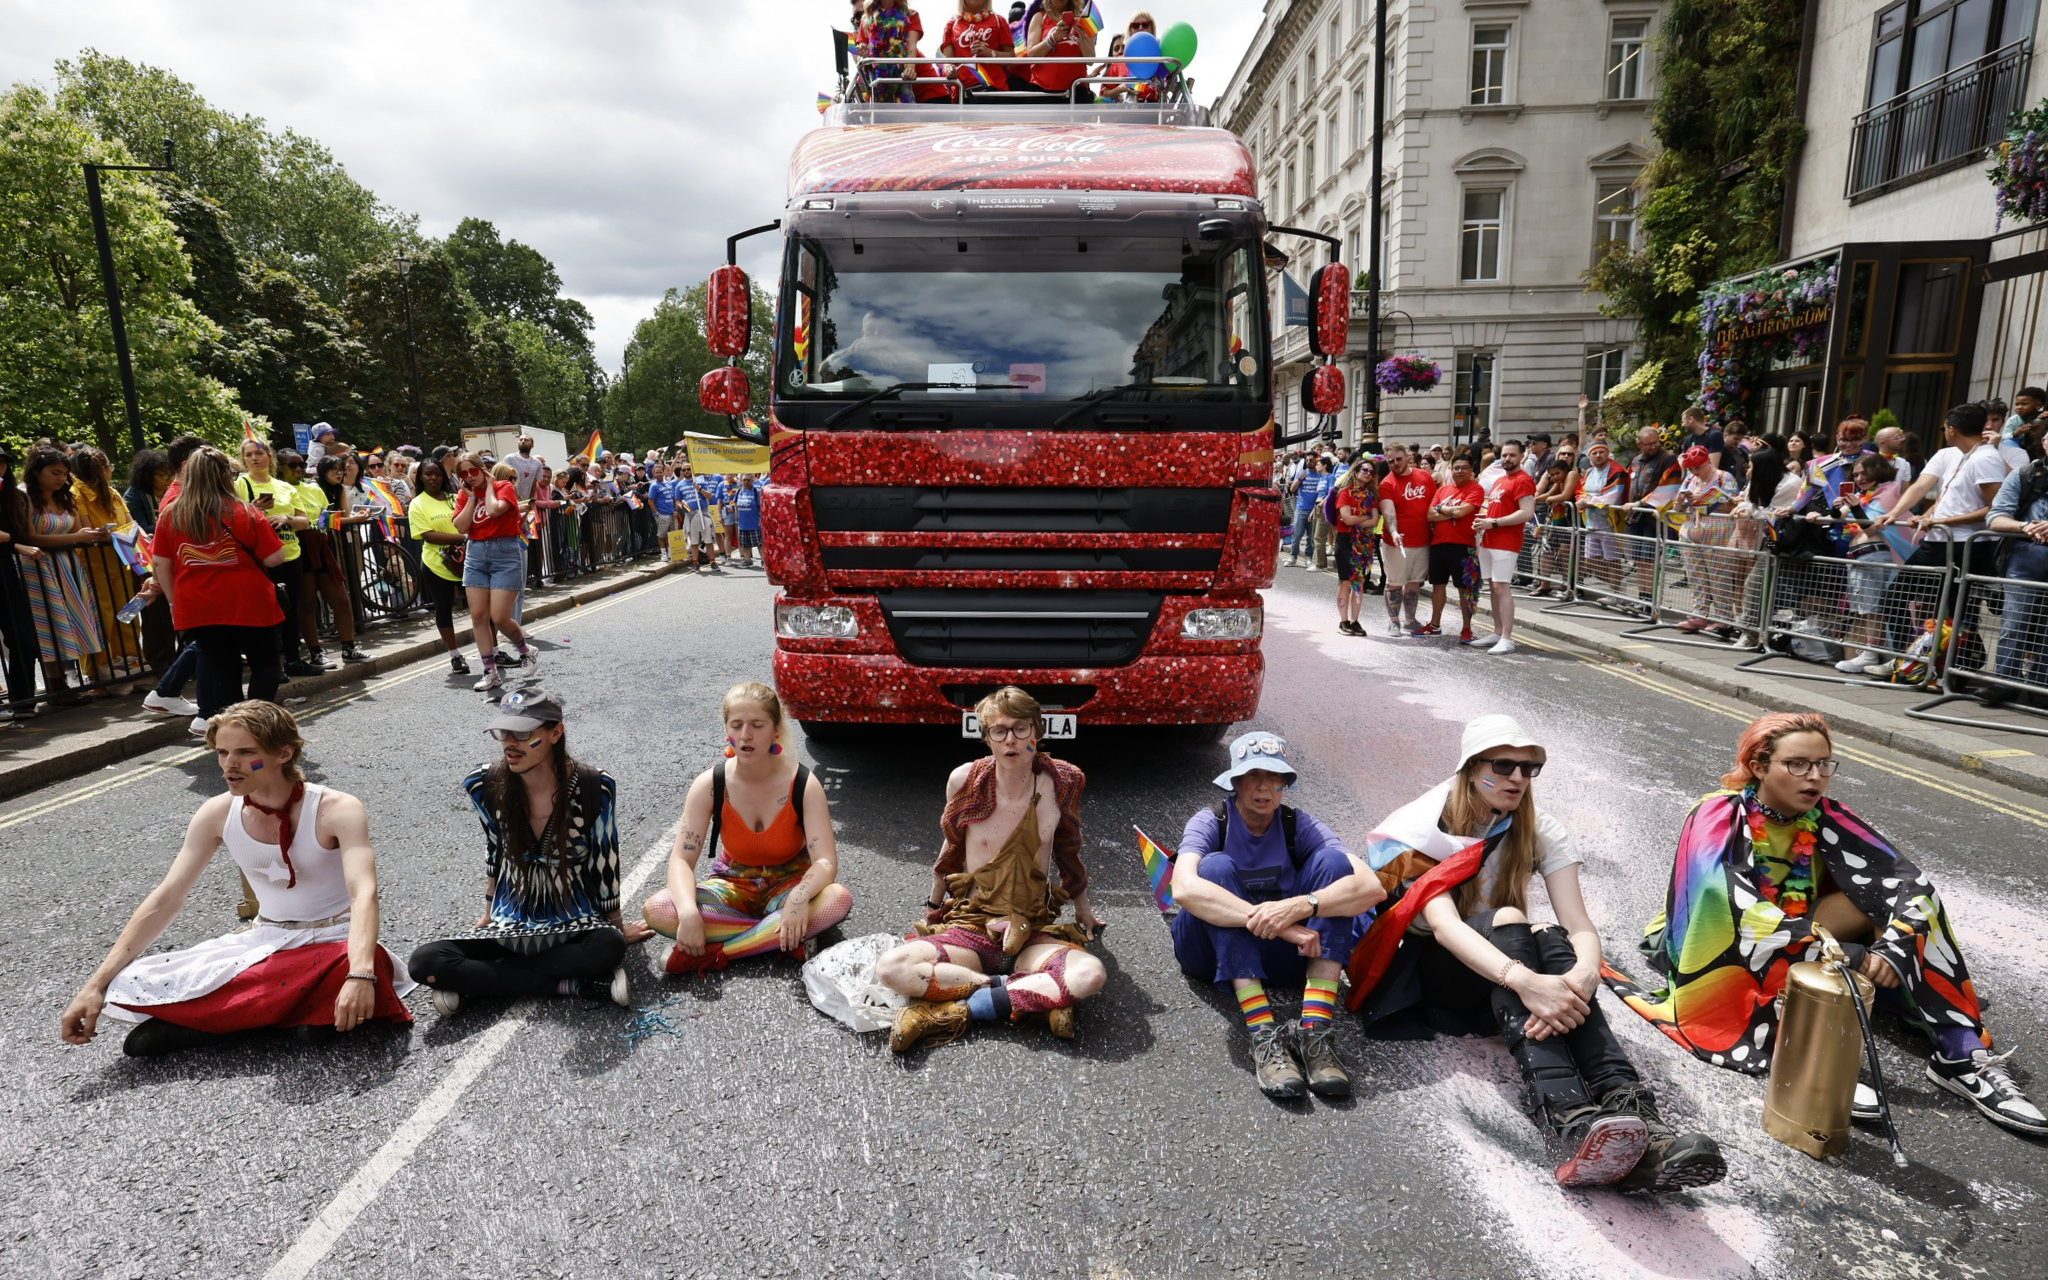 Watch: Just Stop Oil activists disrupt Pride parade in London